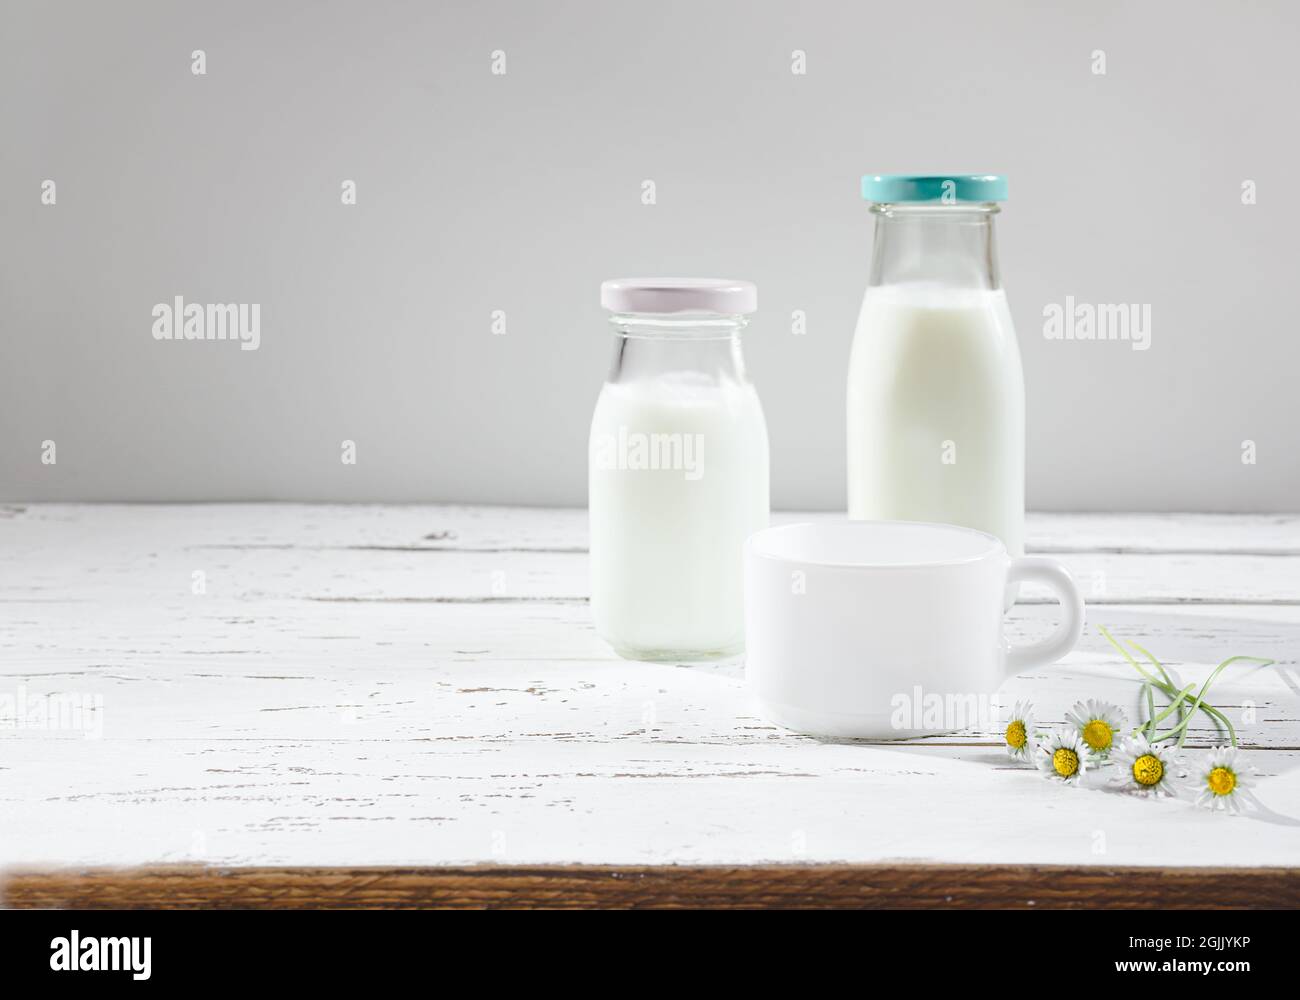 Two glass bottles and a mug with fresh organic milk or dairy product on a white wooden table, diet and nutrition concept with copy space Stock Photo